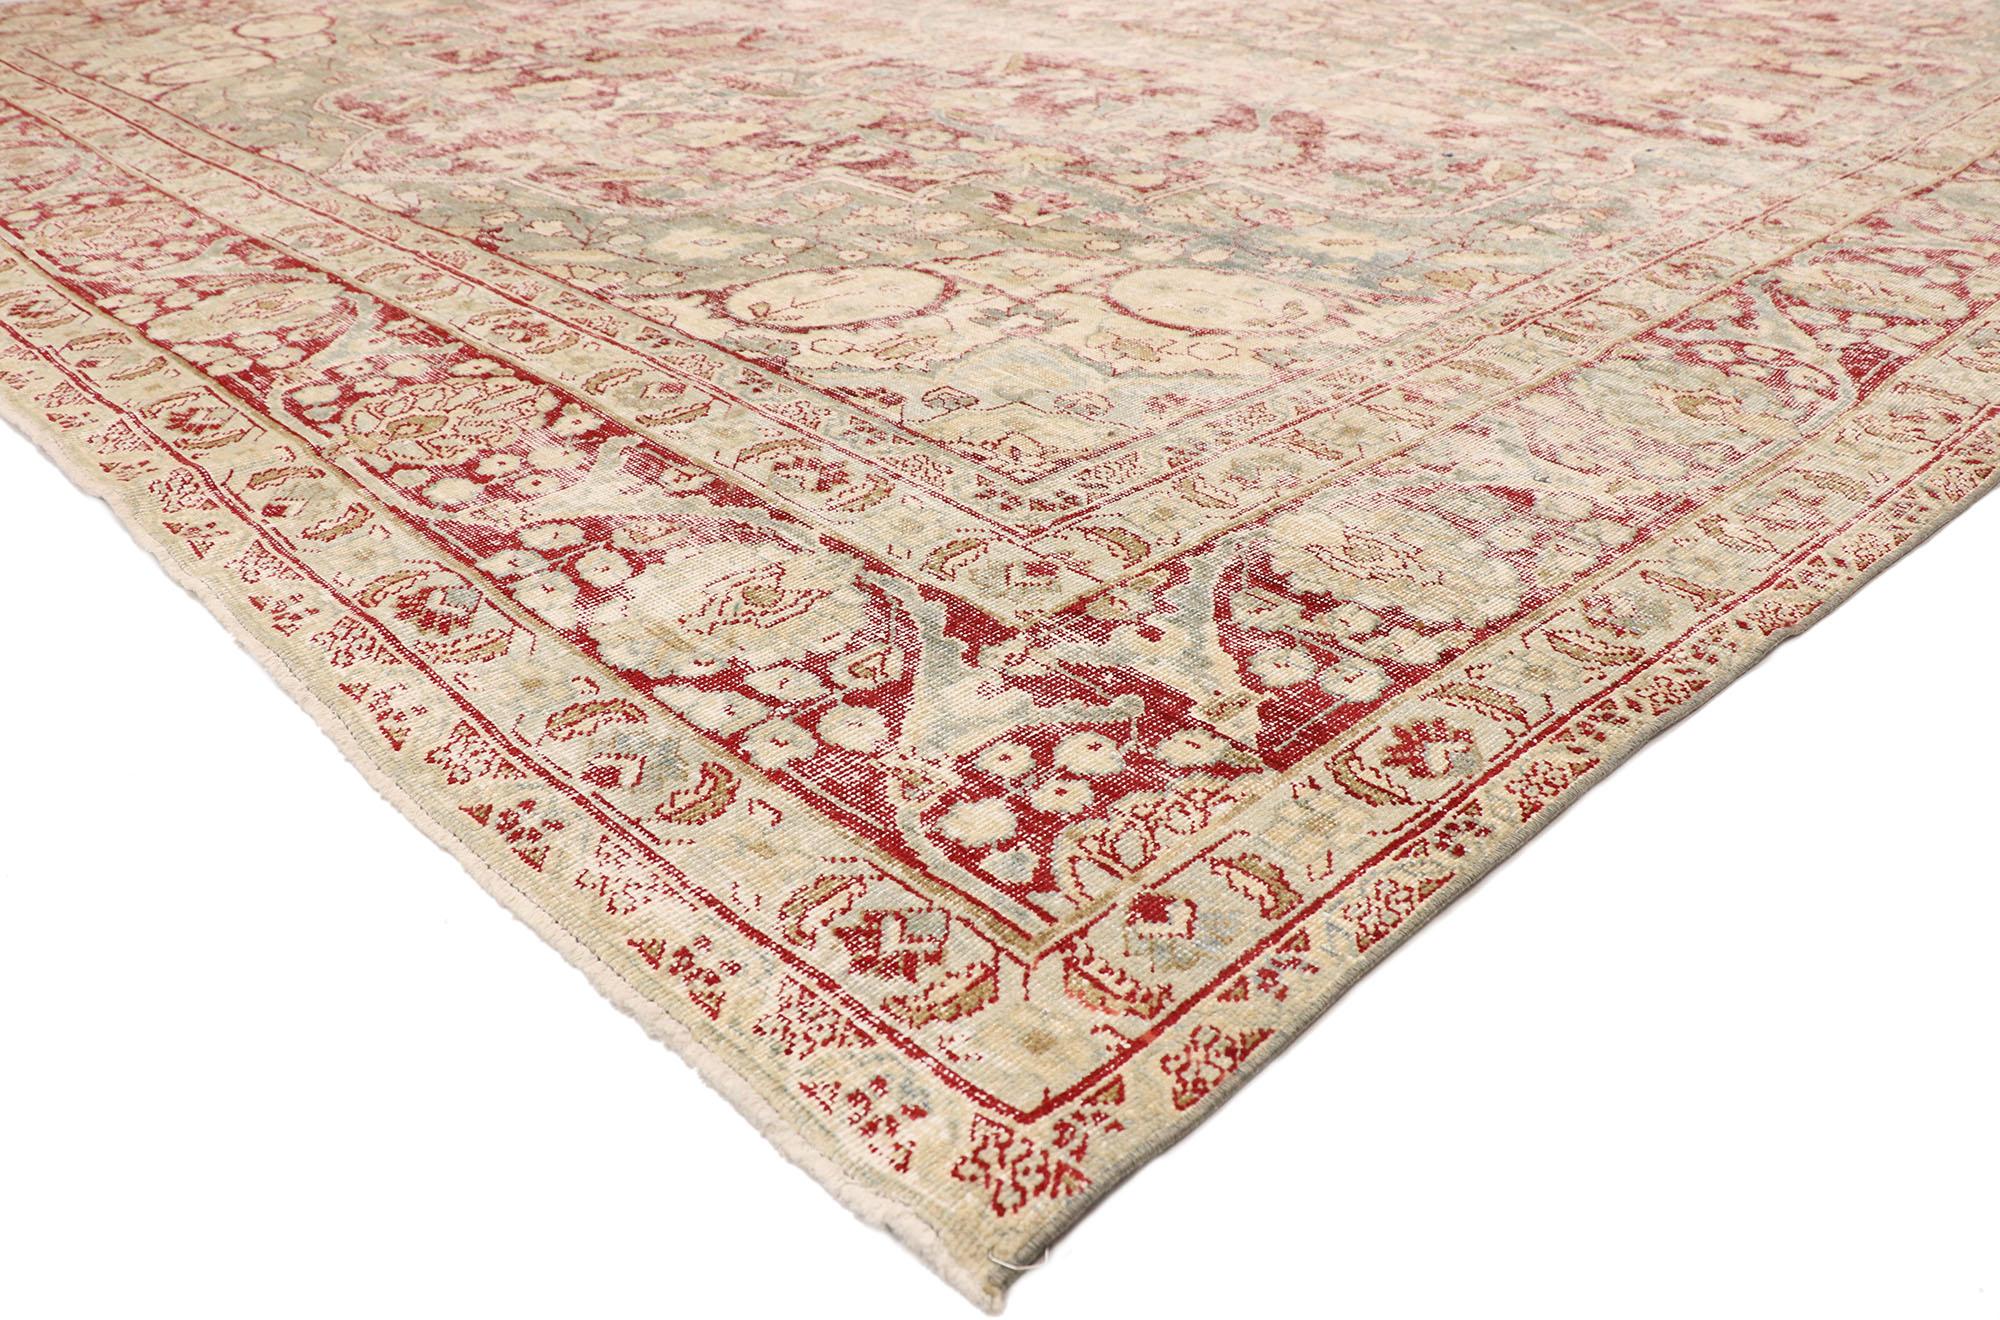 77076, distressed antique Persian Tabriz rug with rustic English chintz style 11'11 x 14'09. Balancing a timeless floral design with traditional sensibility and a lovingly timeworn patina, this hand knotted wool distressed antique Persian Tabriz rug